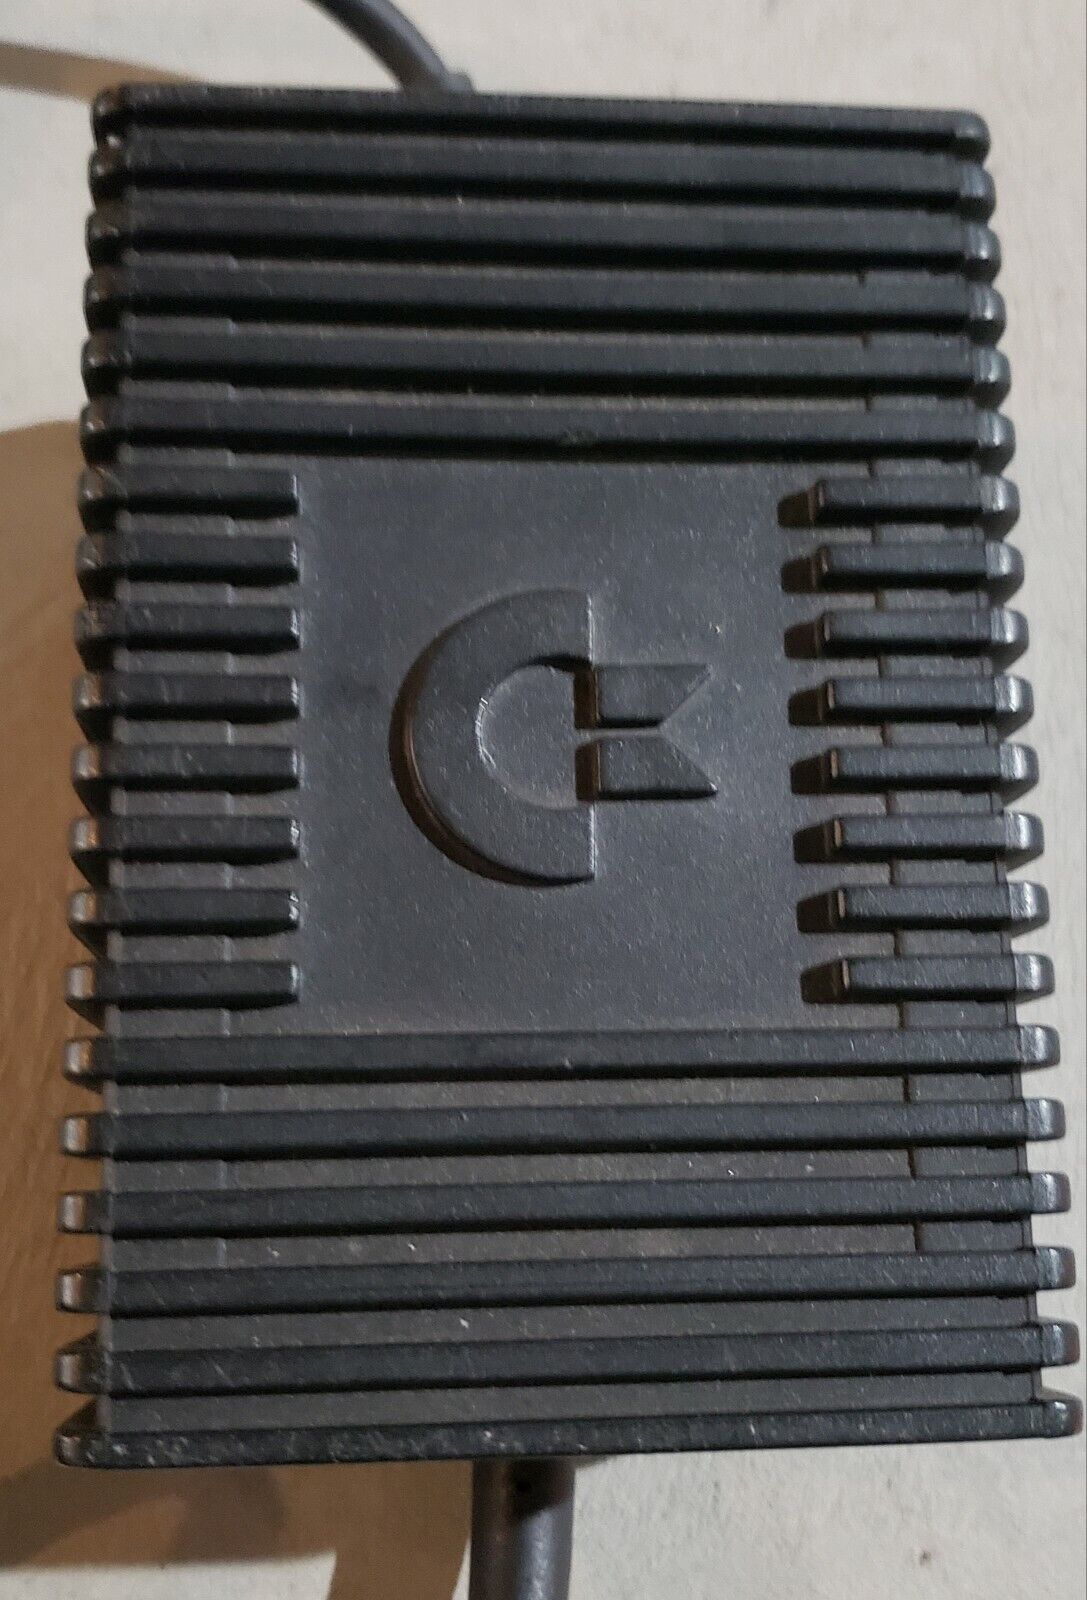 Original Commodore power supply for C64 computers - Tested & working 